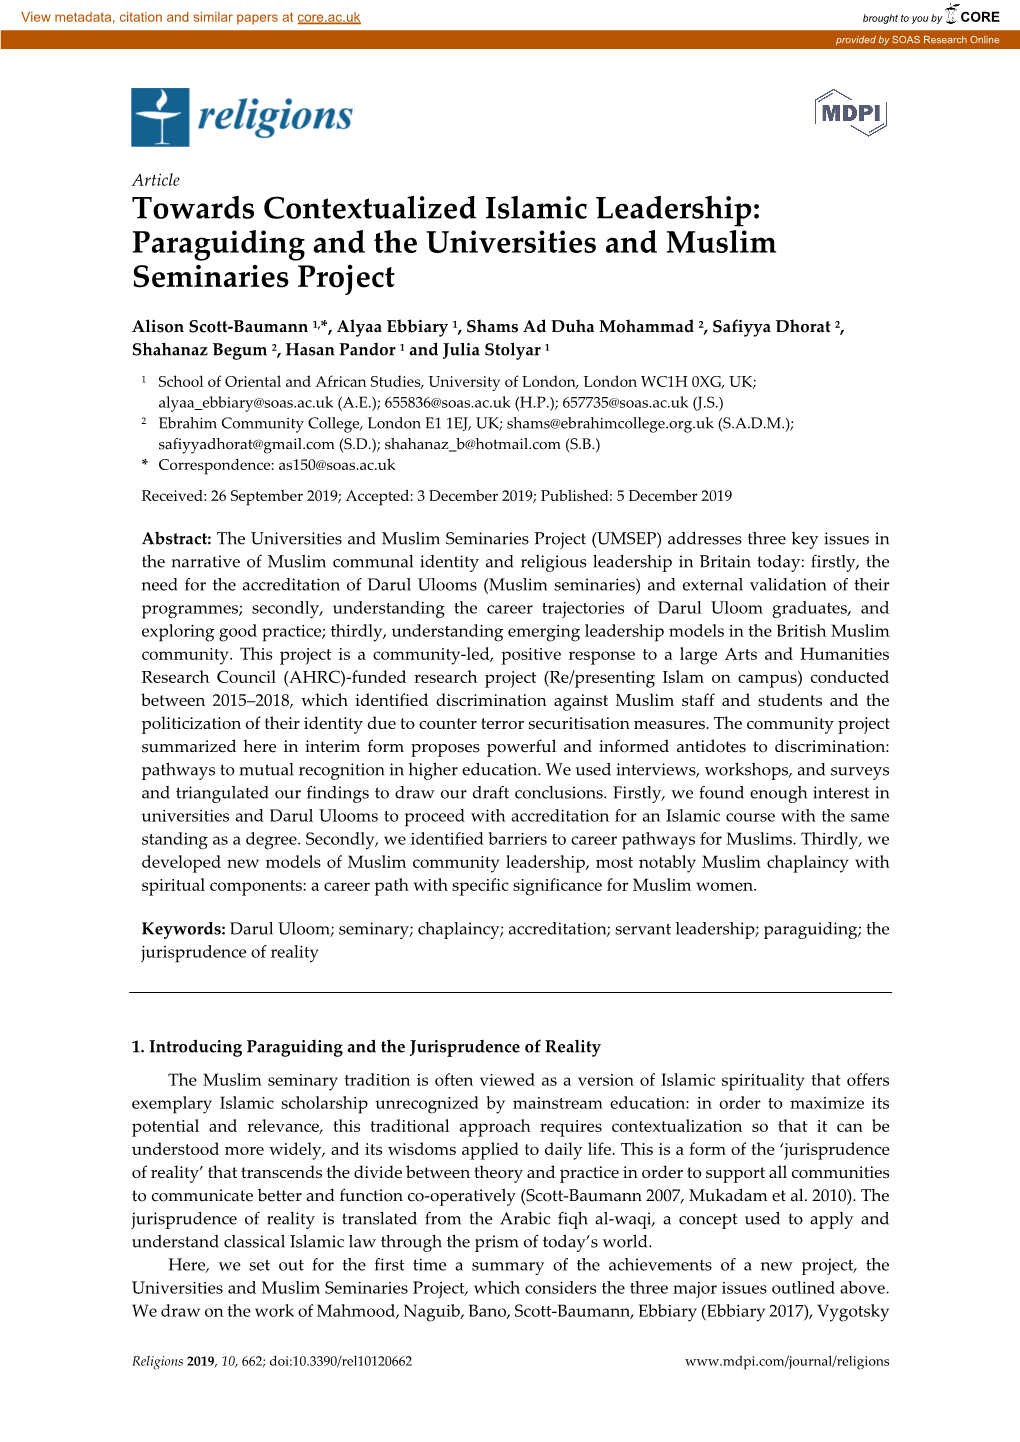 Towards Contextualized Islamic Leadership: Paraguiding and the Universities and Muslim Seminaries Project